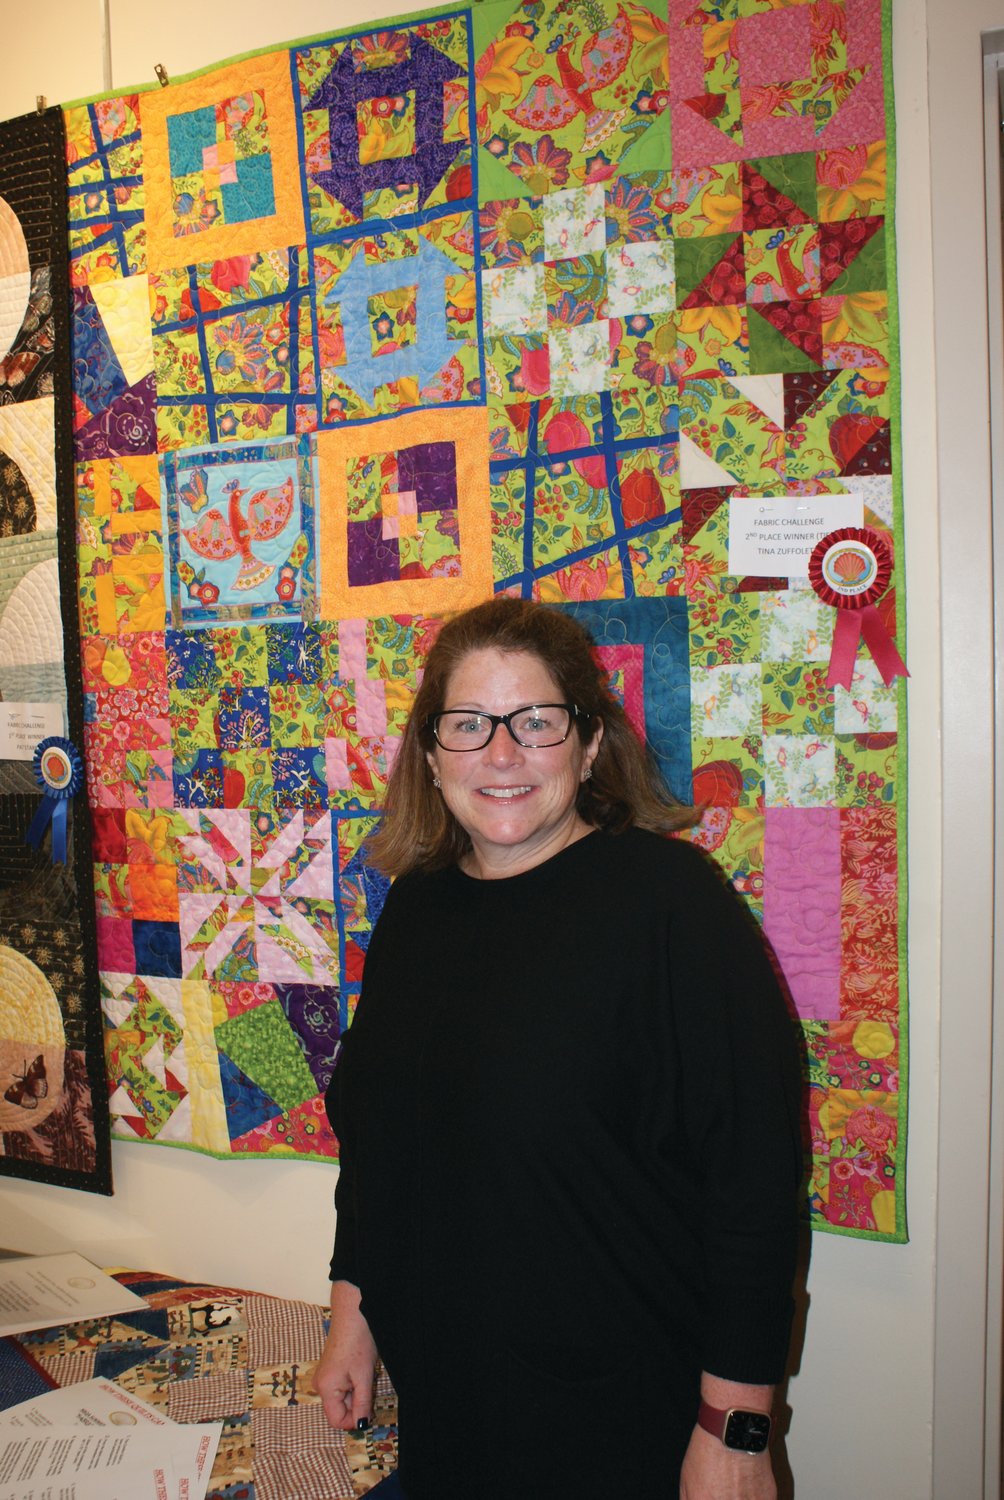 TIED FOR SECOND: In the organization’s fabric challenge, there was one first place winner and two second place winners. Tina Zuffoletti’s quilt was among the second place winners.